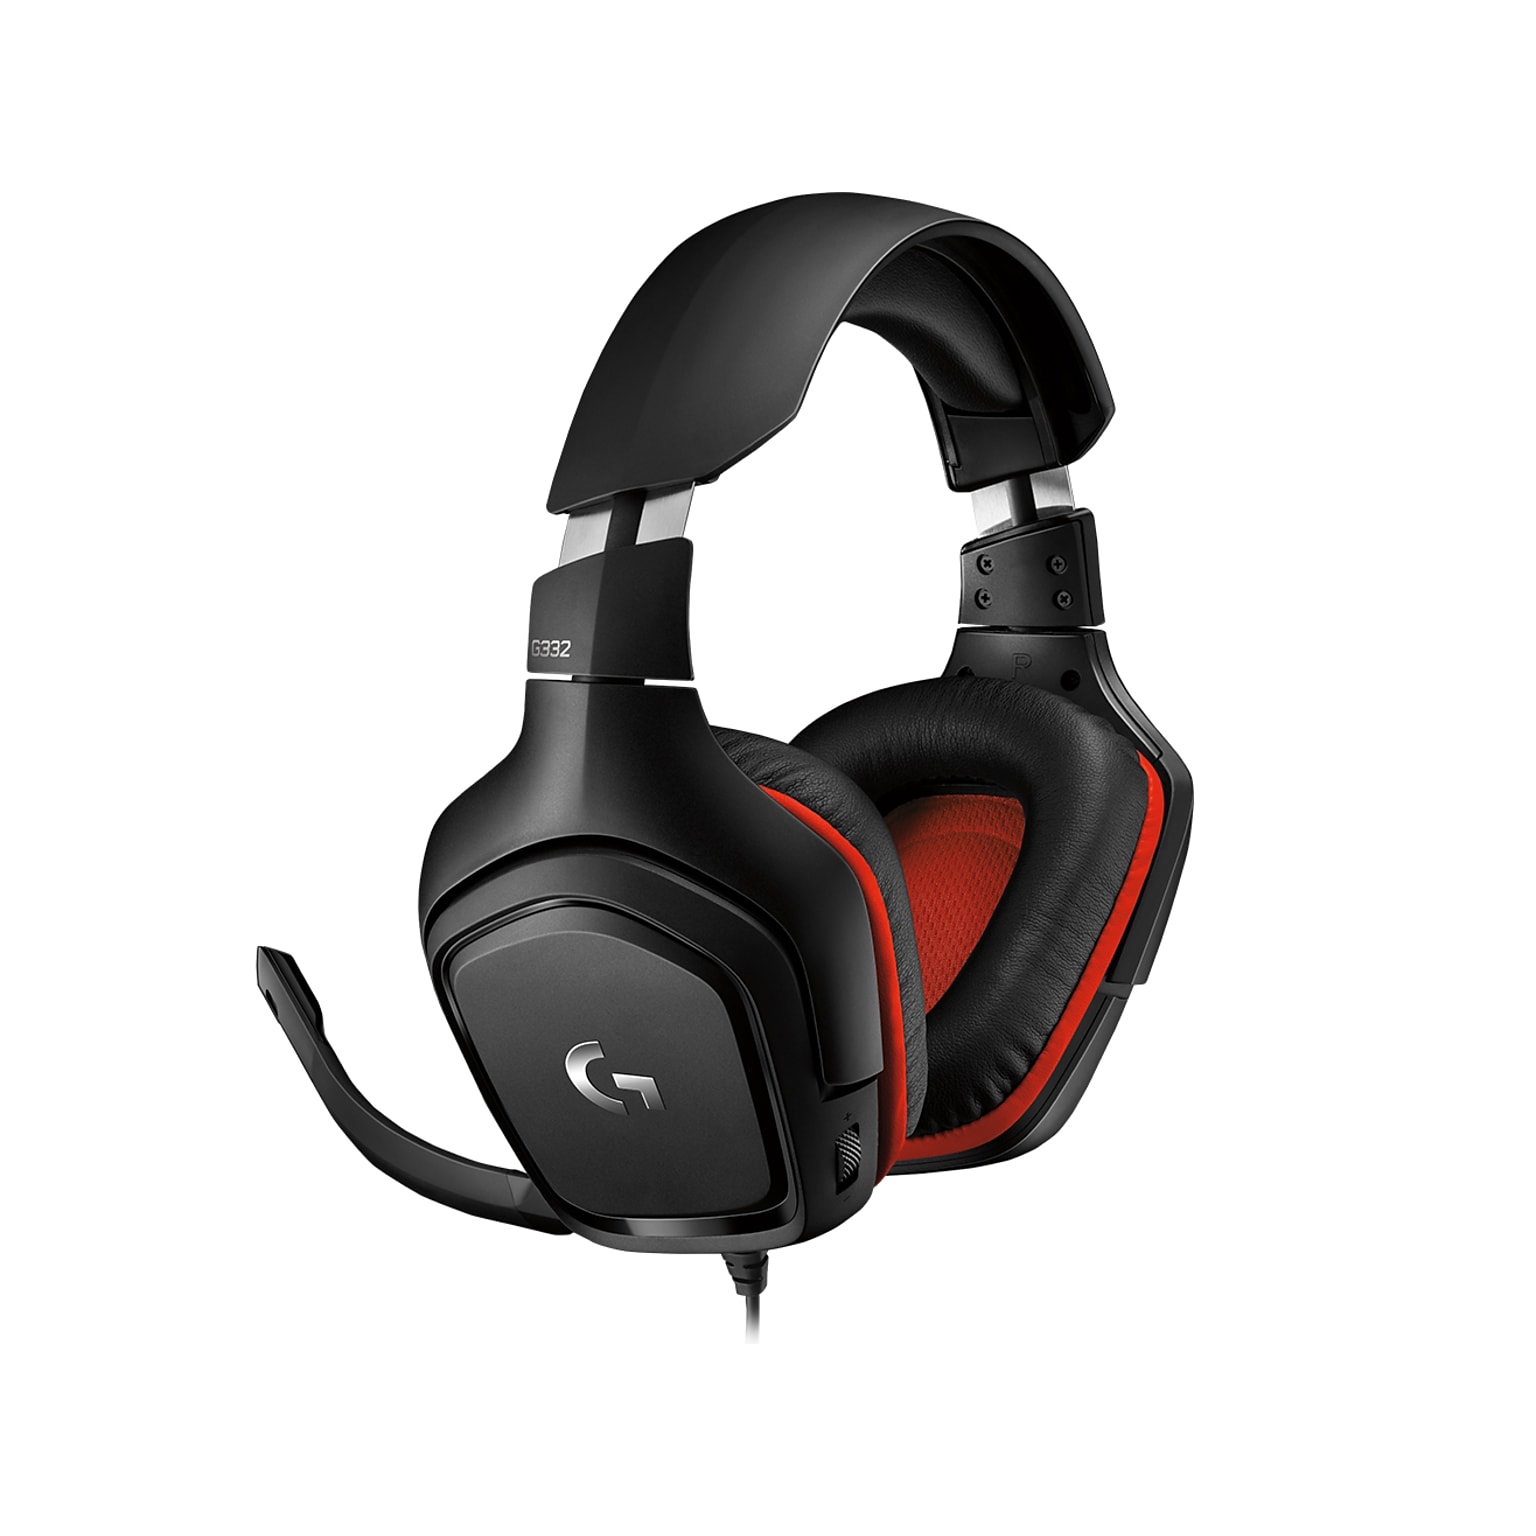 Logitech G Series G332 Wired Over-the-Ear Gaming Headset, Black/Red  (981-000755) | Quill.com